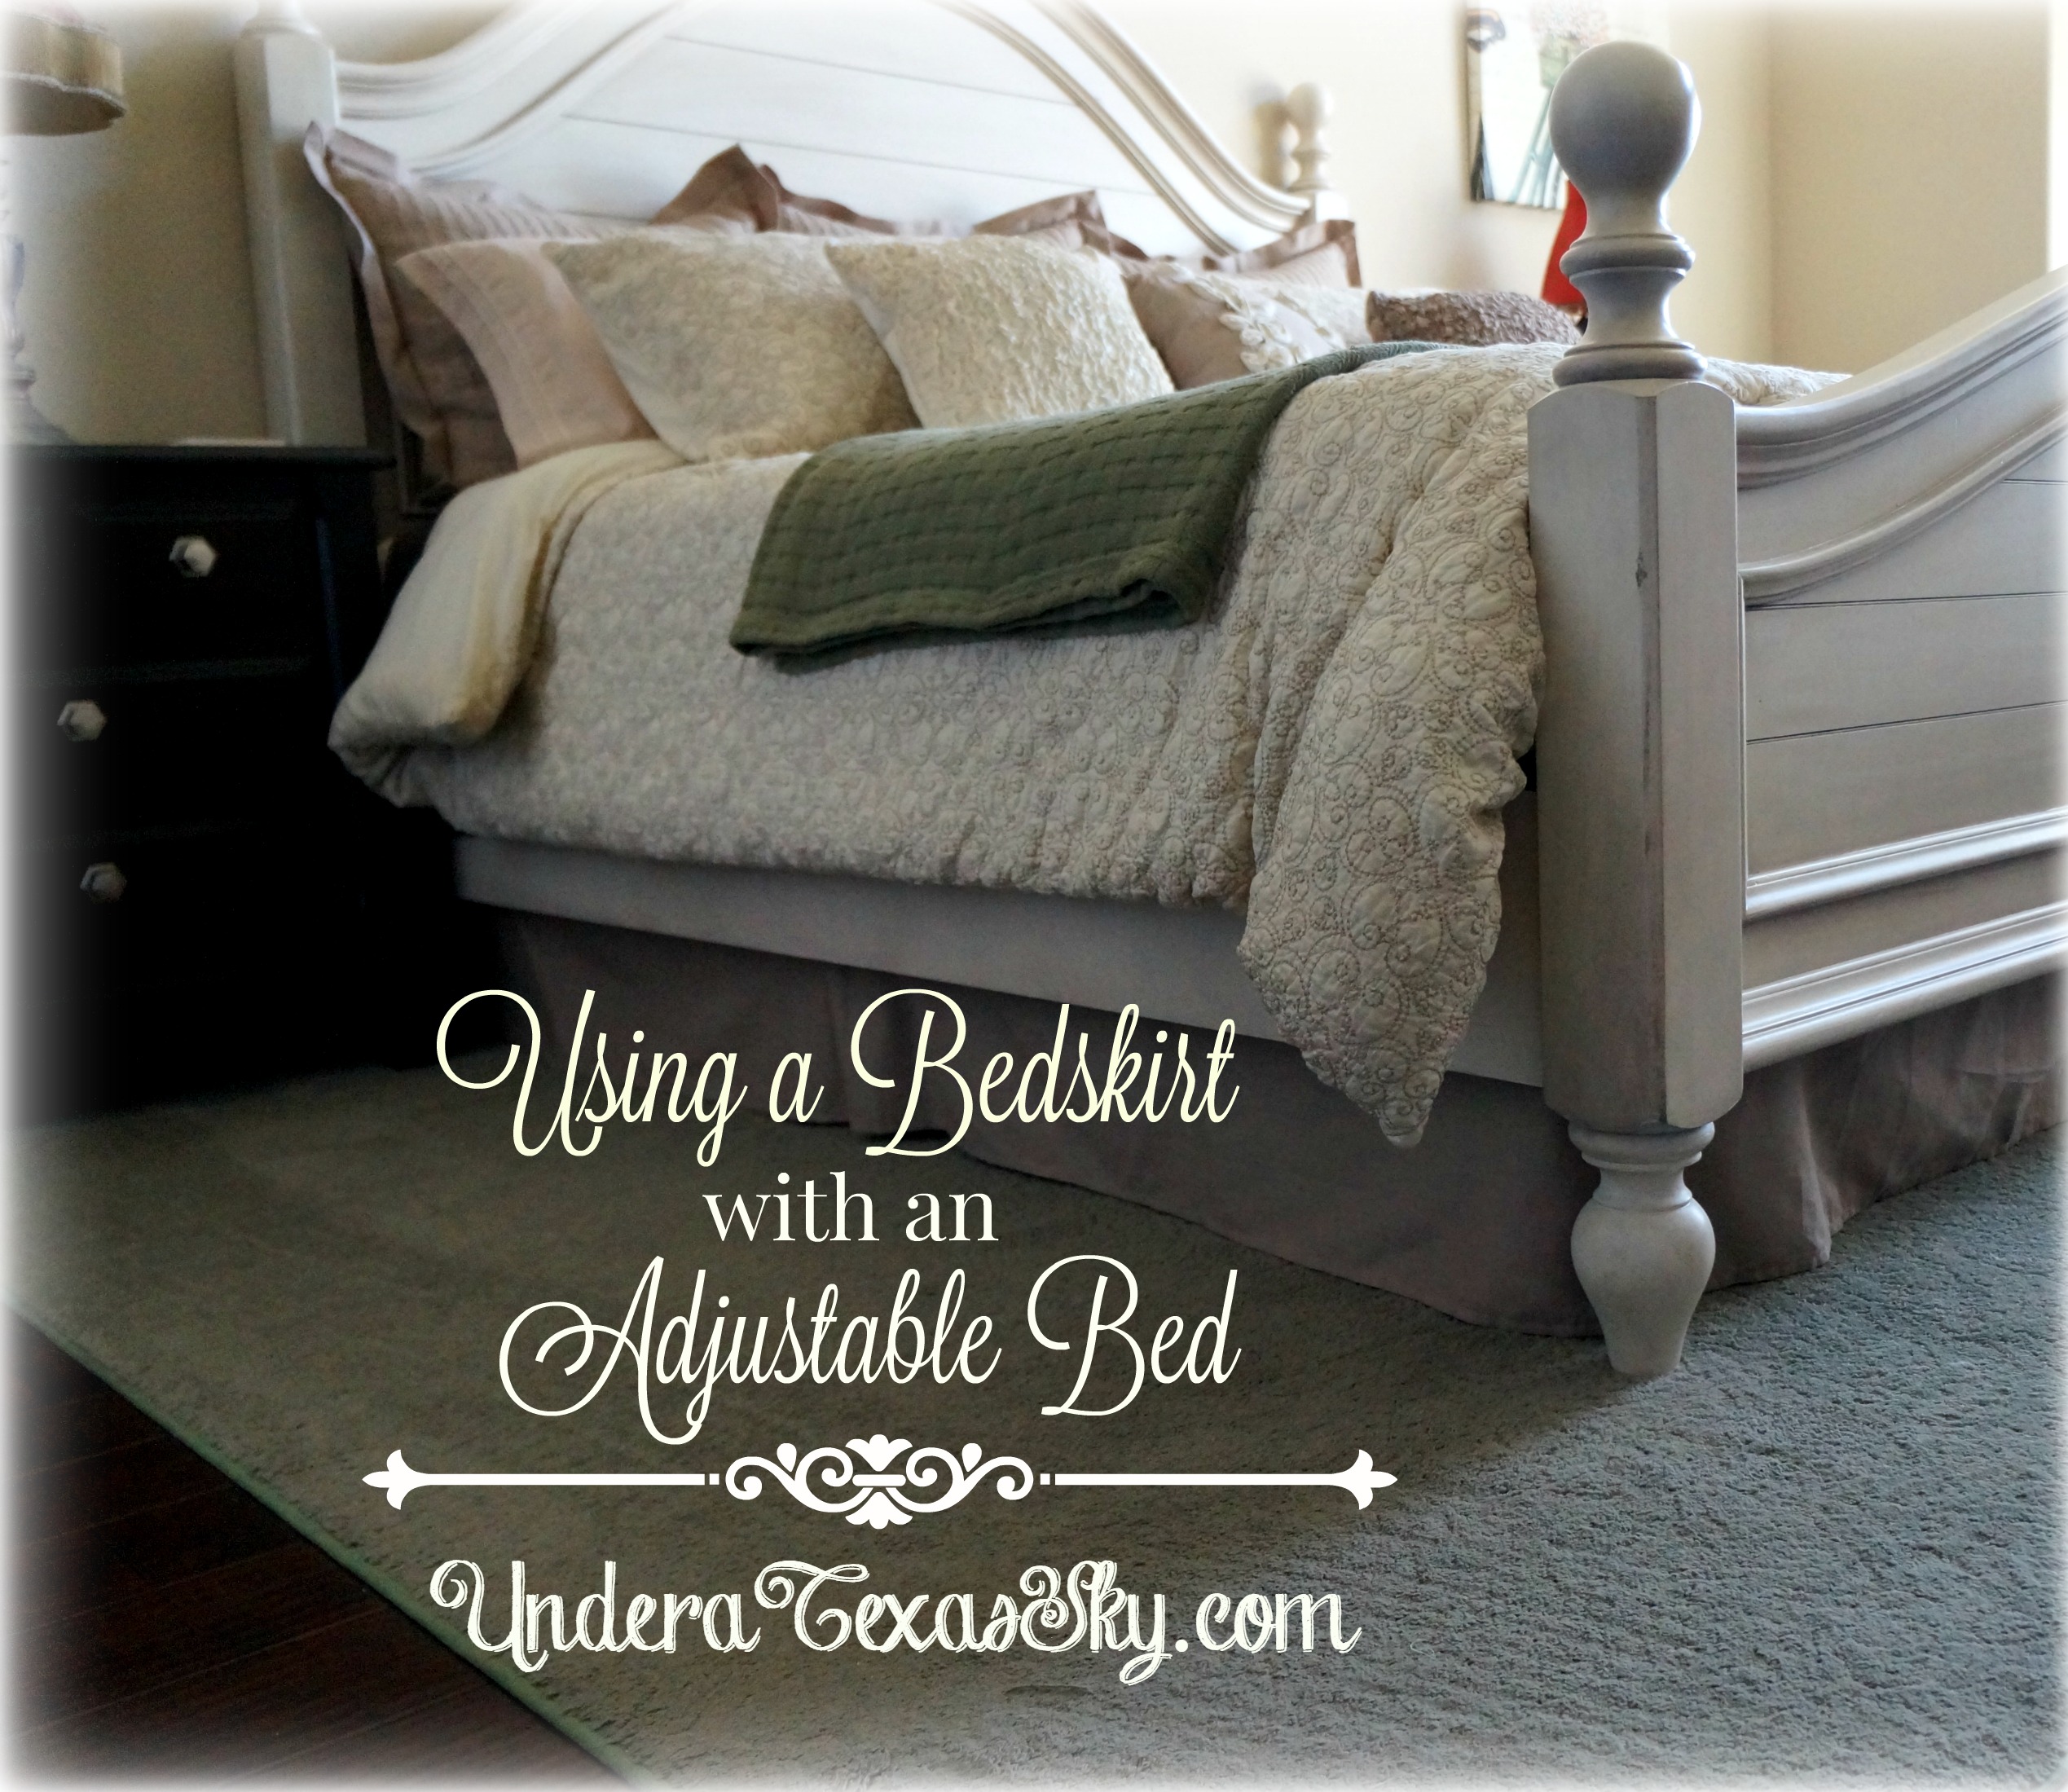 Using A Bedskirt With An Adjustable Bed, Will An Adjustable Base Fit In My Bed Frame